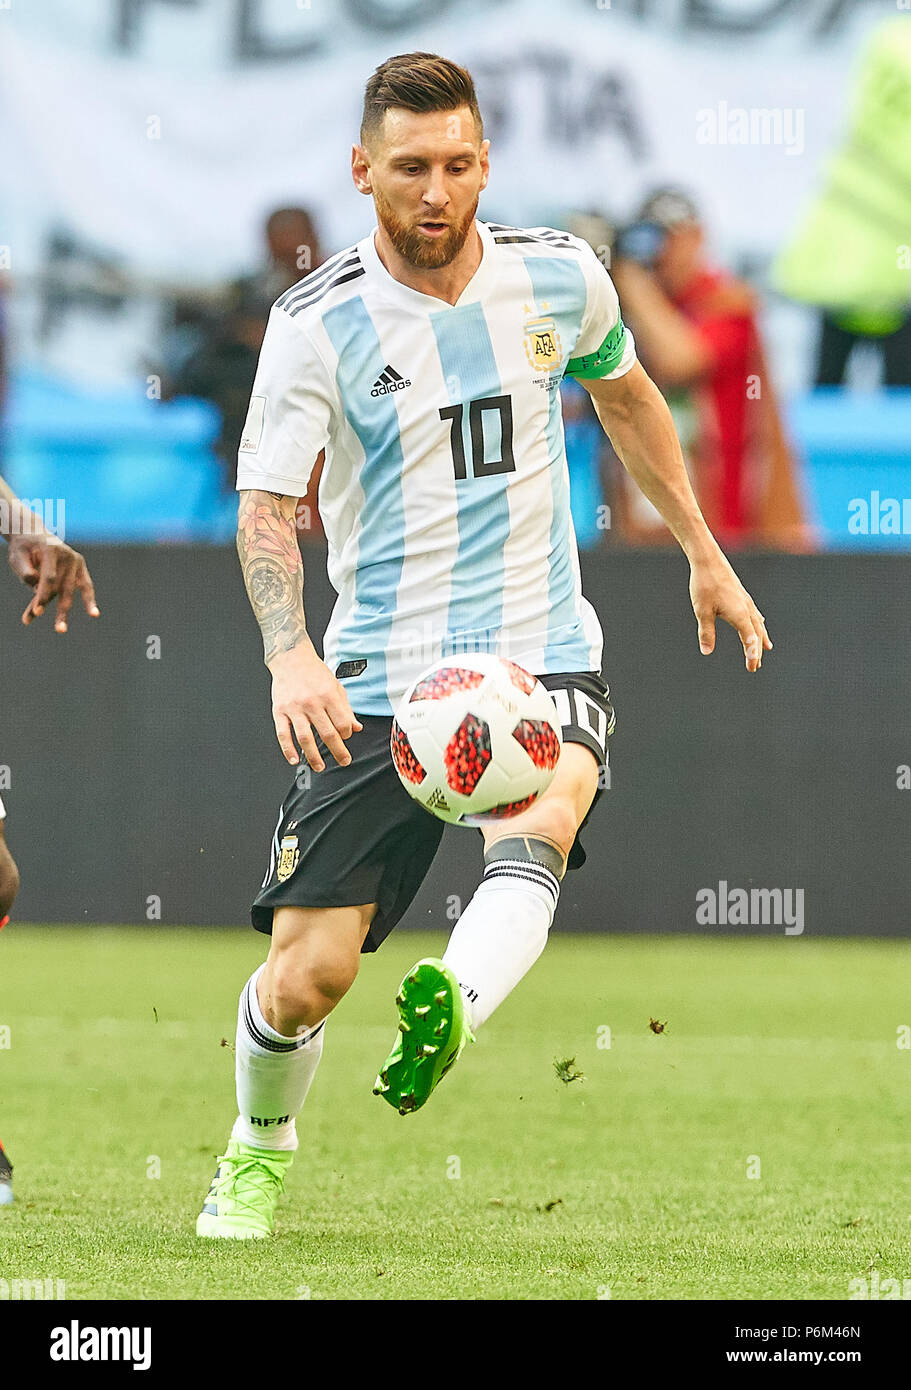 Kazan, Russia. 30th Jun, 2018. Argentina - France 3-4, Soccer, Kazan, June 30, 2018 Lionel MESSI, Argentina  10  drives, controls the ball, action, full-size, Single action with ball, full body, whole figure, cutout, single shots, ball treatment, pick-up, header, cut out,  ARGENTINA - FRANCE 3-4 FIFA WORLD CUP 2018 RUSSIA, Best of 16 , Season 2018/2019,  June 30, 2018  Stadium K a z a n - A r e n a in Kazan, Russia. © Peter Schatz / Alamy Live News Stock Photo